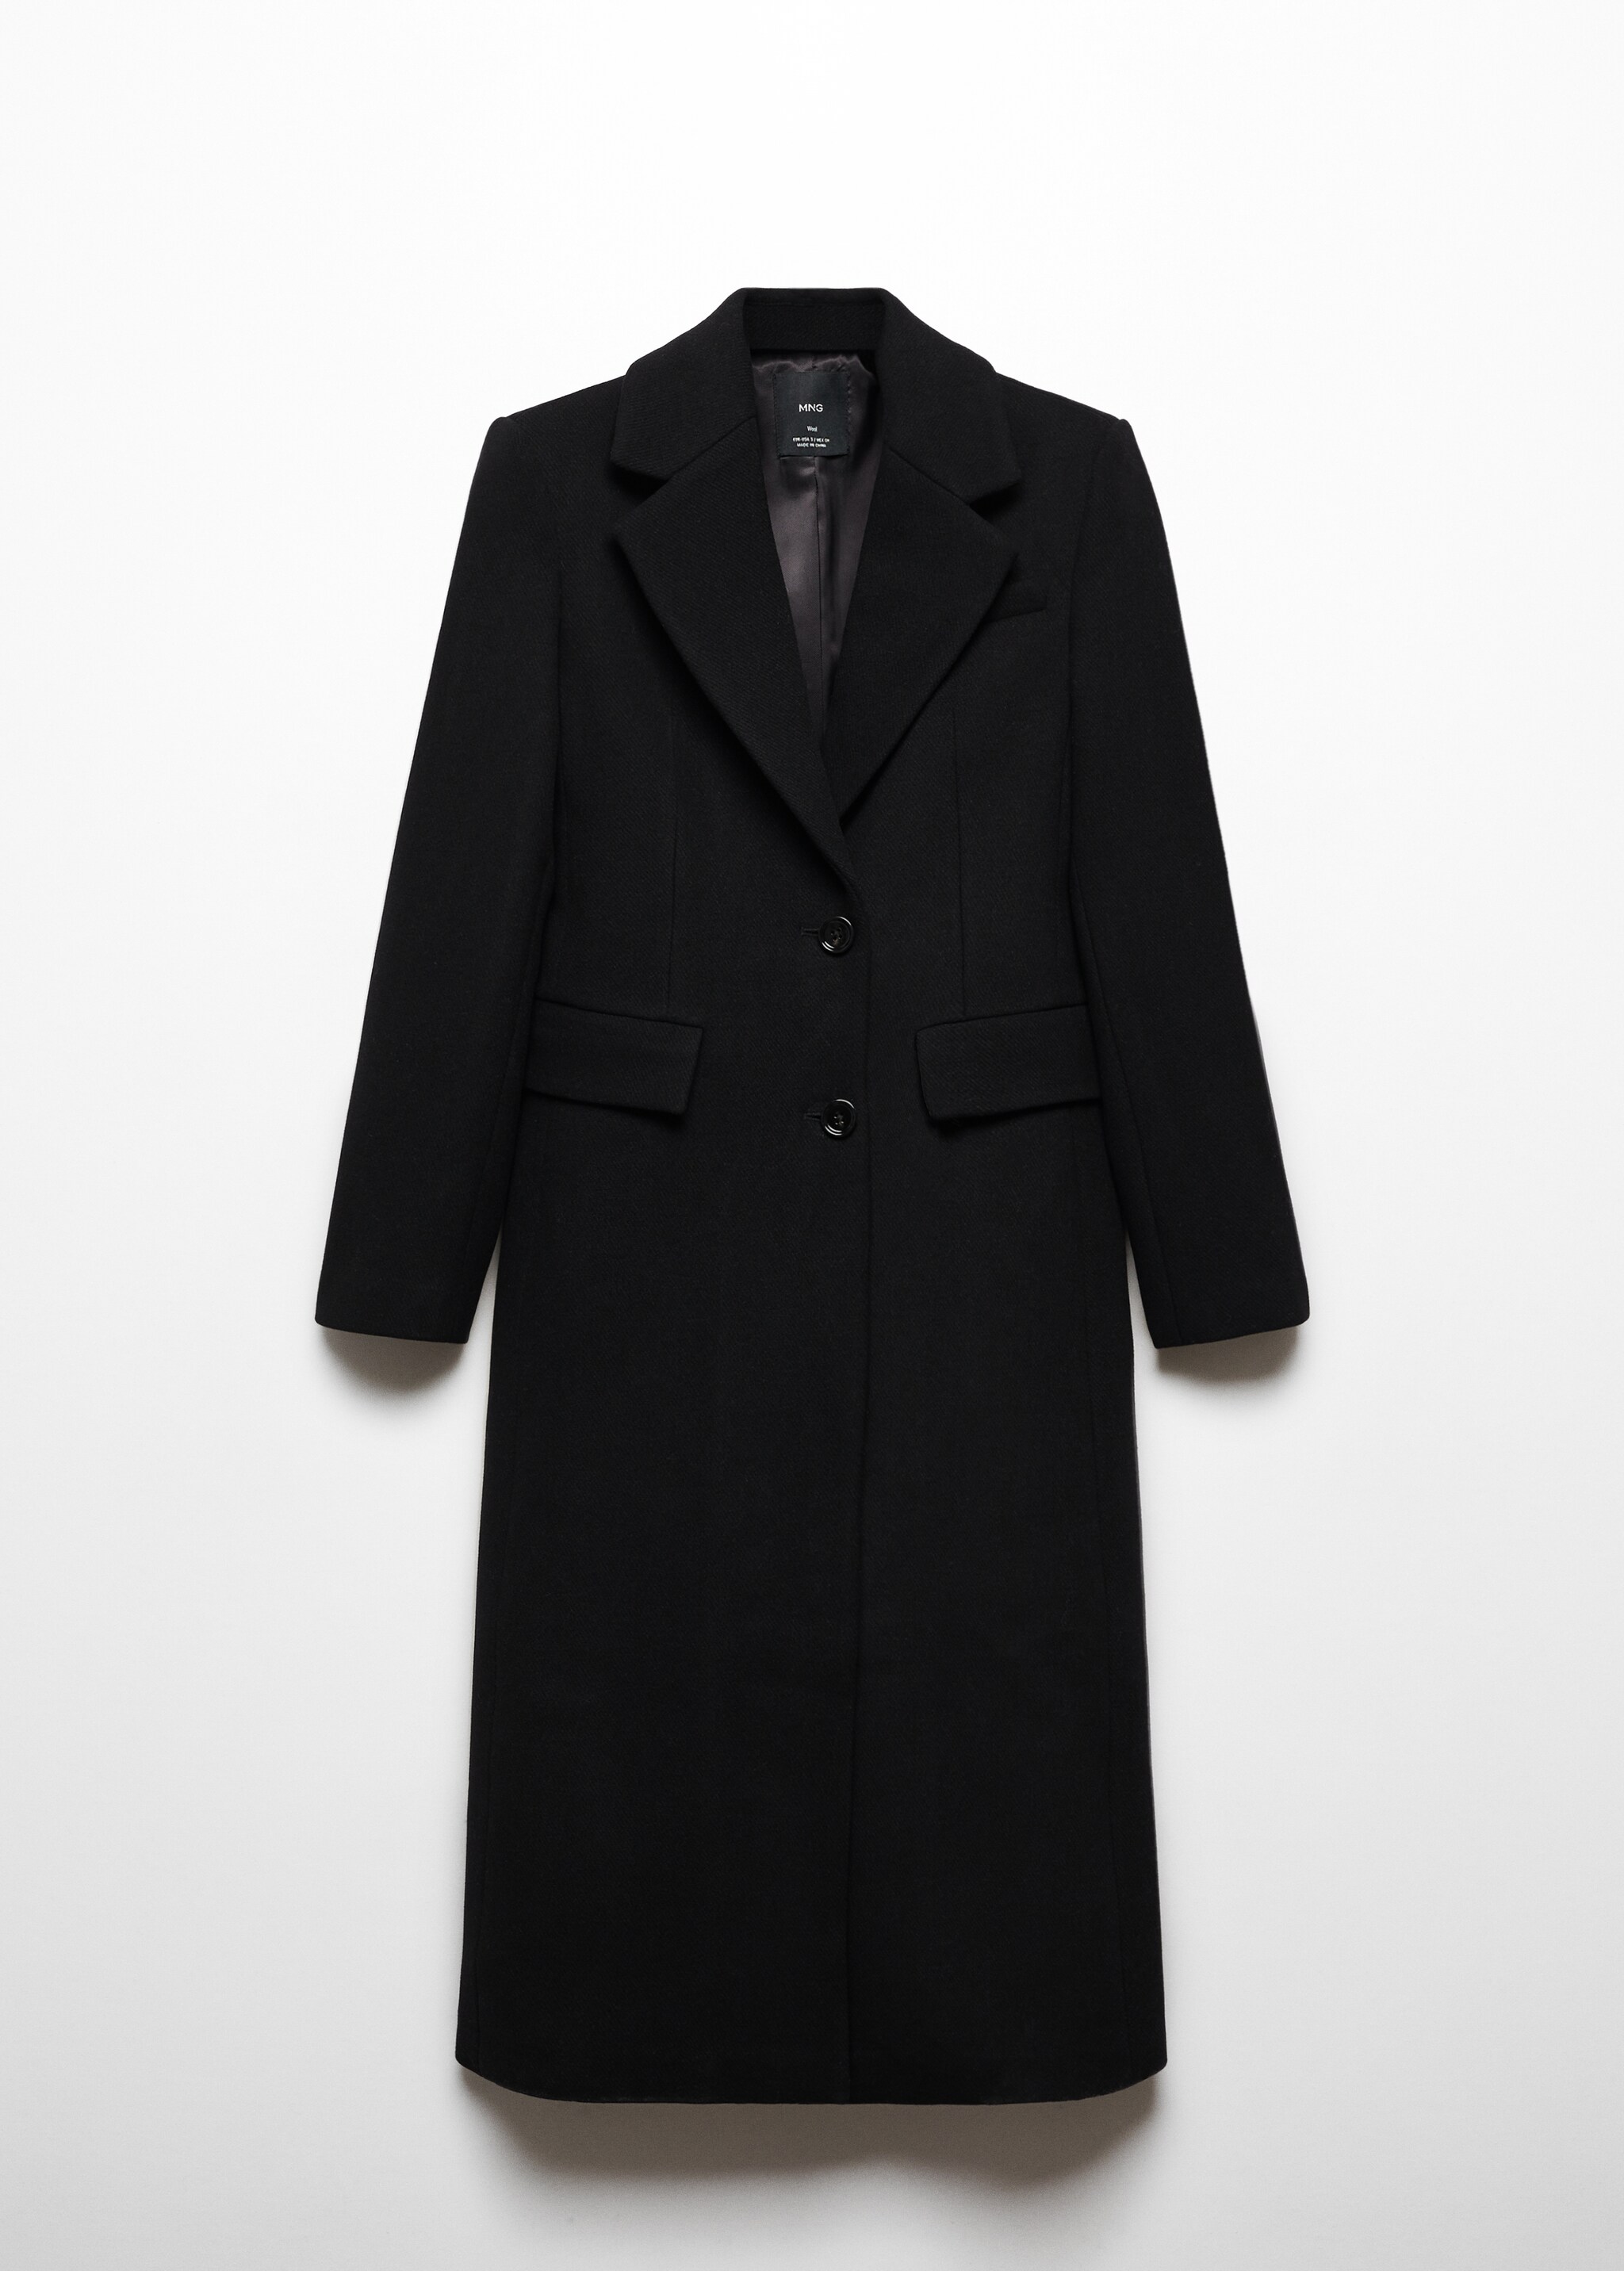 Tailored wool coat - Article without model